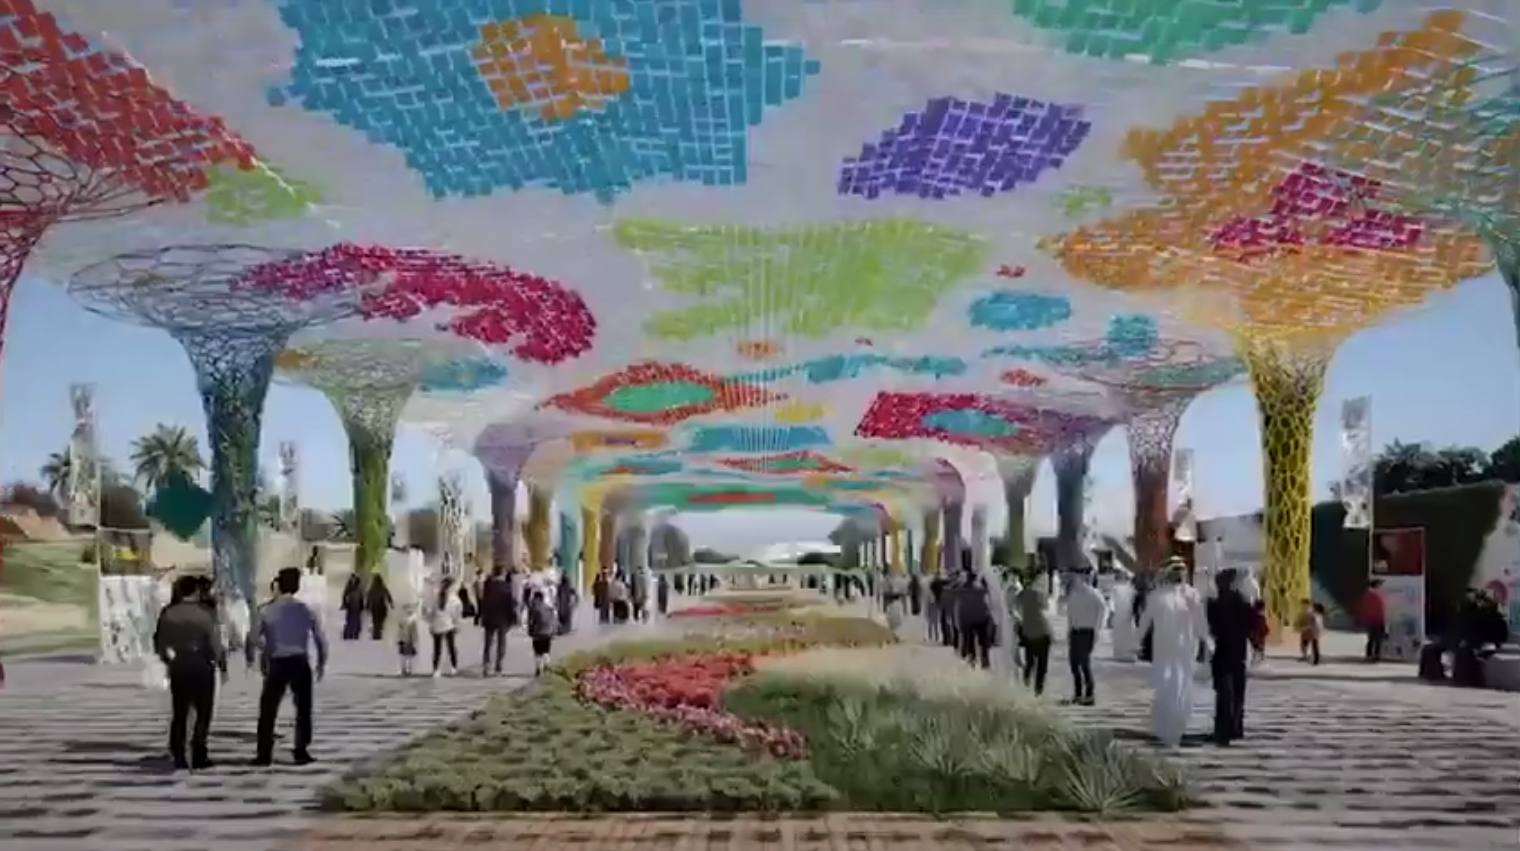 International Horticultural Exhibition 2019 Beijing, China